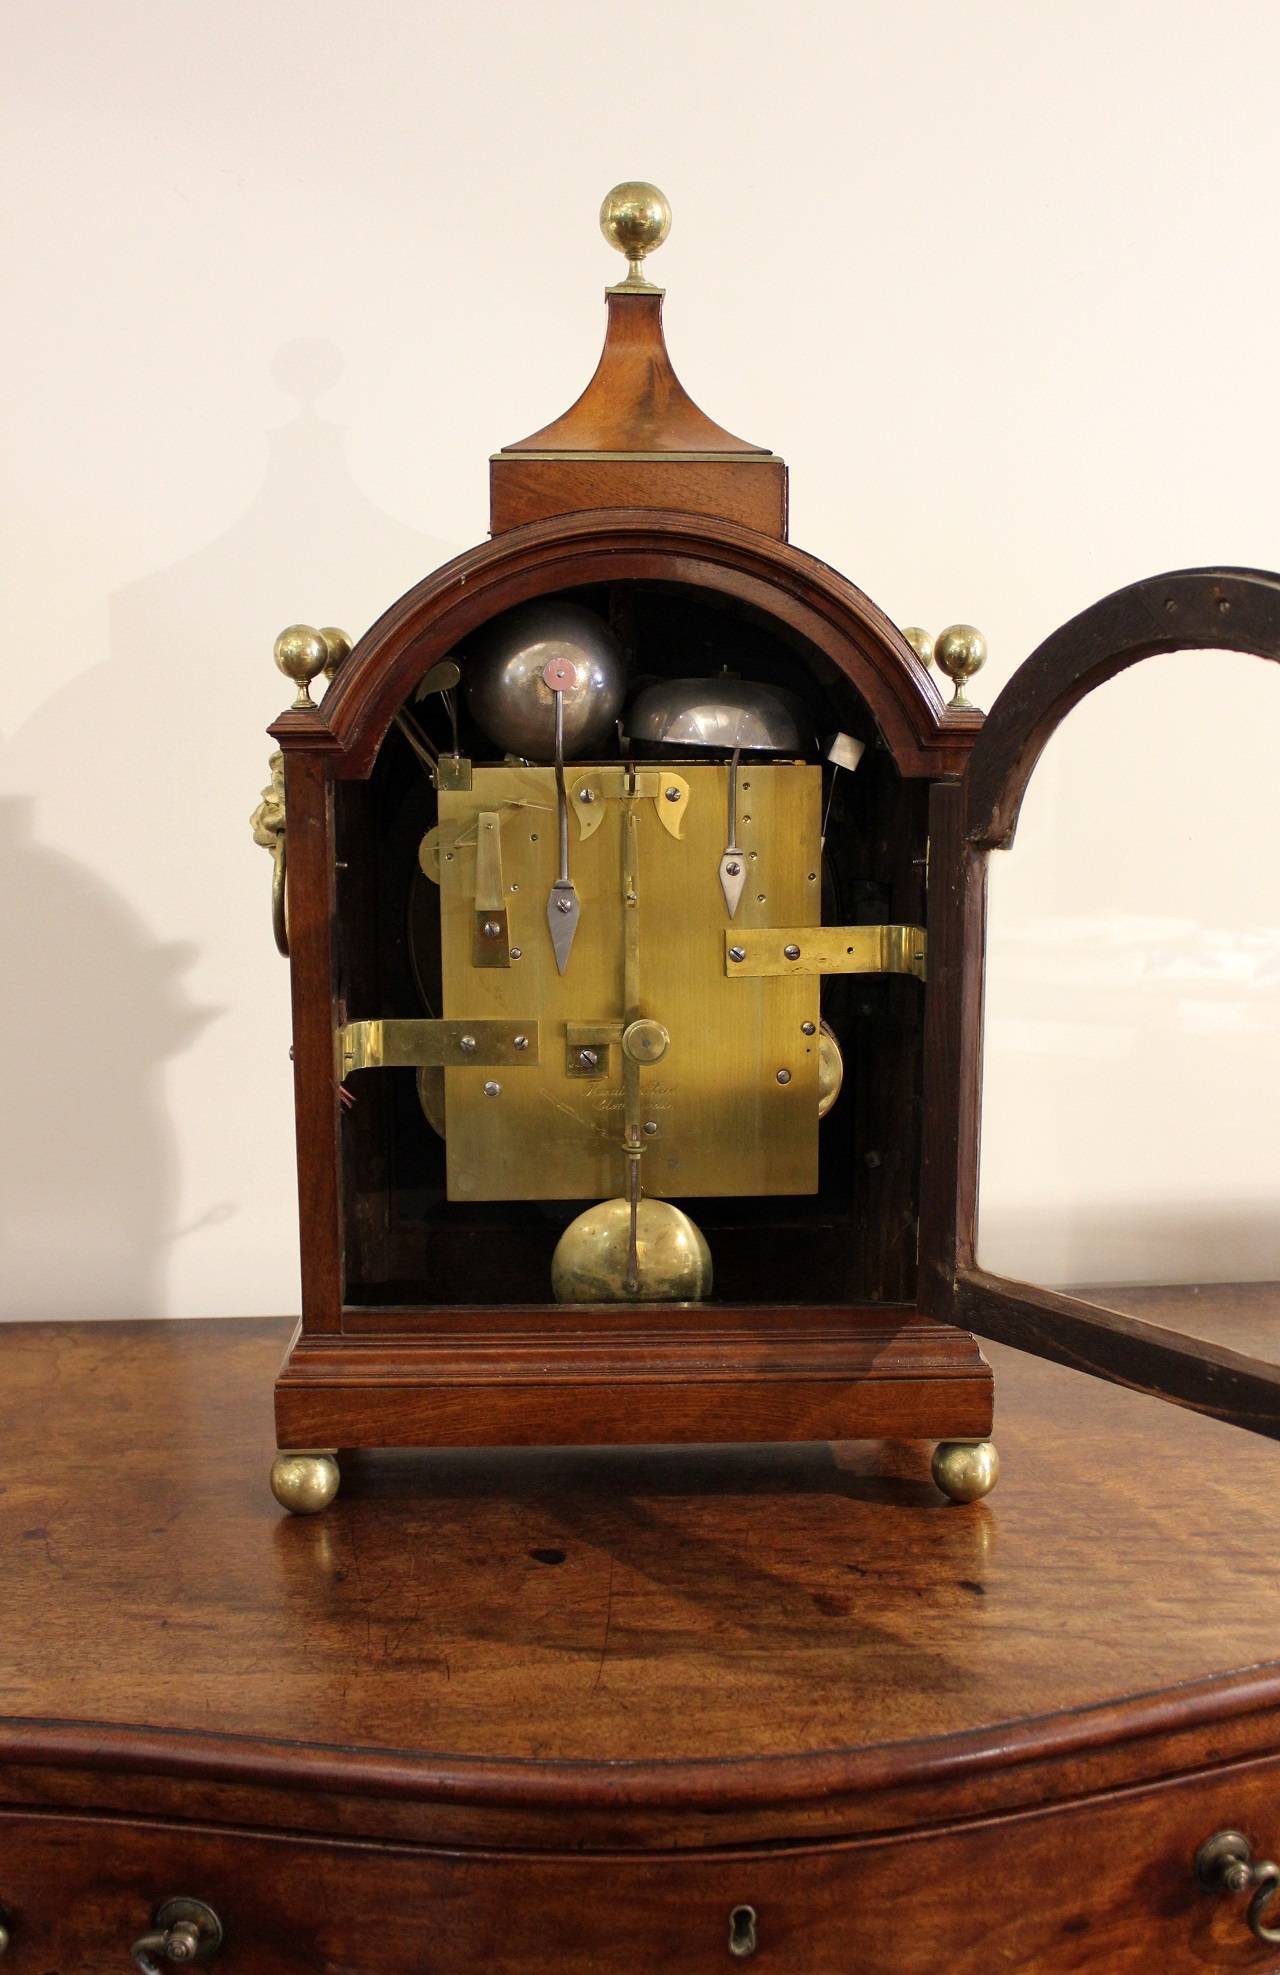 A Regency period mahogany and brass-mounted three-train, Bracket Clock, the 30cm circular silvered dial with Roman numerals and outer minute divisions, spade-hour hand and plain minute, signed 'Thwaites & Reed, Clerkenwell; the substantial movement